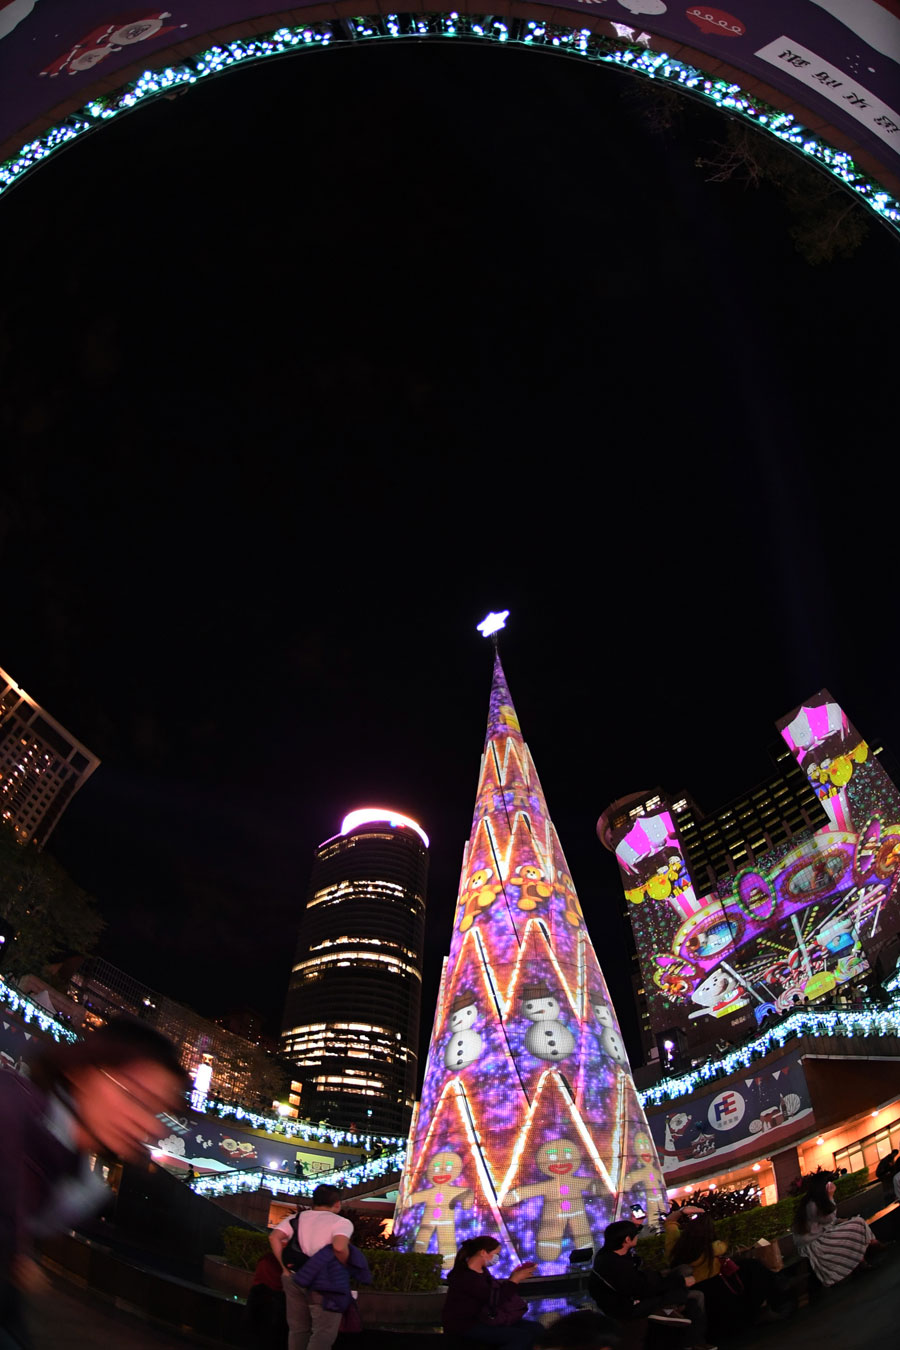 Light show in Taiwan greets Christmas